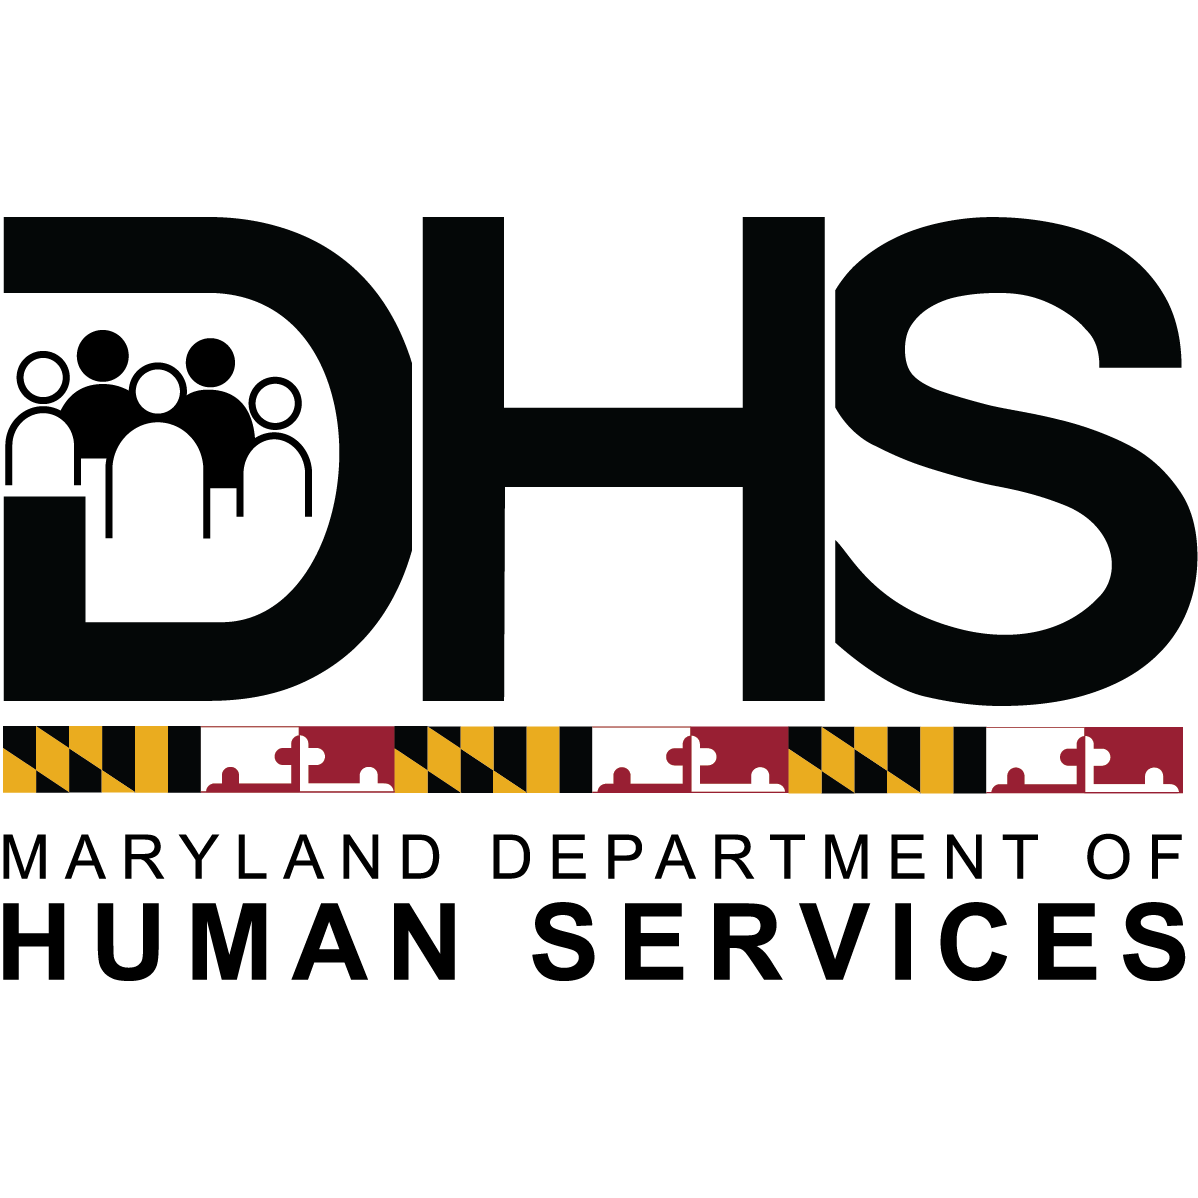 Maryland Department of Human Services Logo